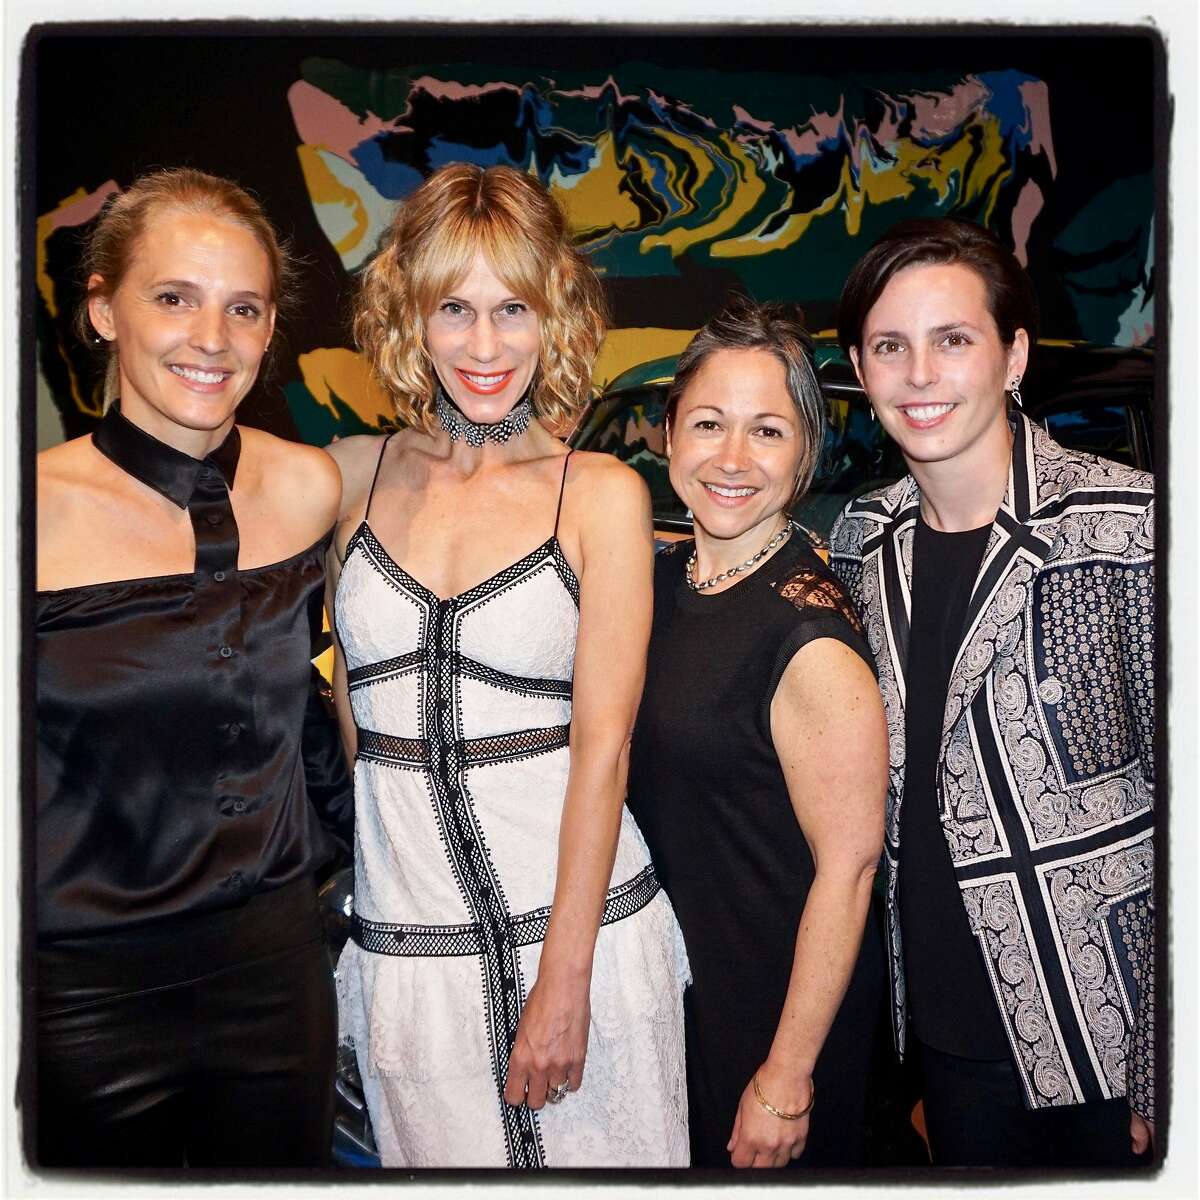 Headlands Center for the Arts auction cochair (from left): Evie Simon, Melissa Barber, Sharon Maidenberg and Jessica Silverman at Fort Mason Center. June 7, 2017.